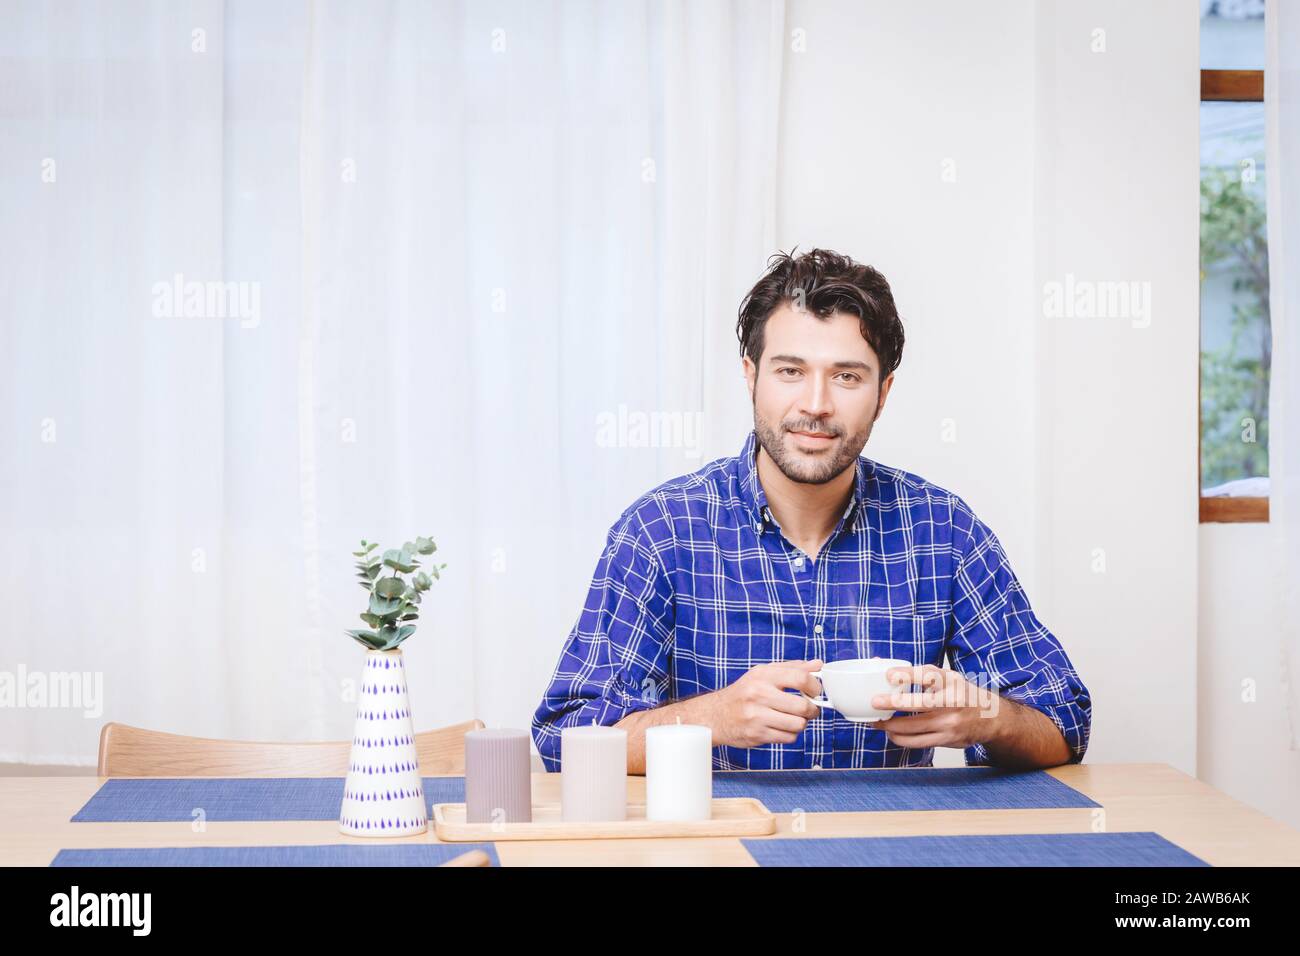 gentle handsome man sitting in the kitchen table to drink some hot beverage or coffee with white space for text. Stock Photo